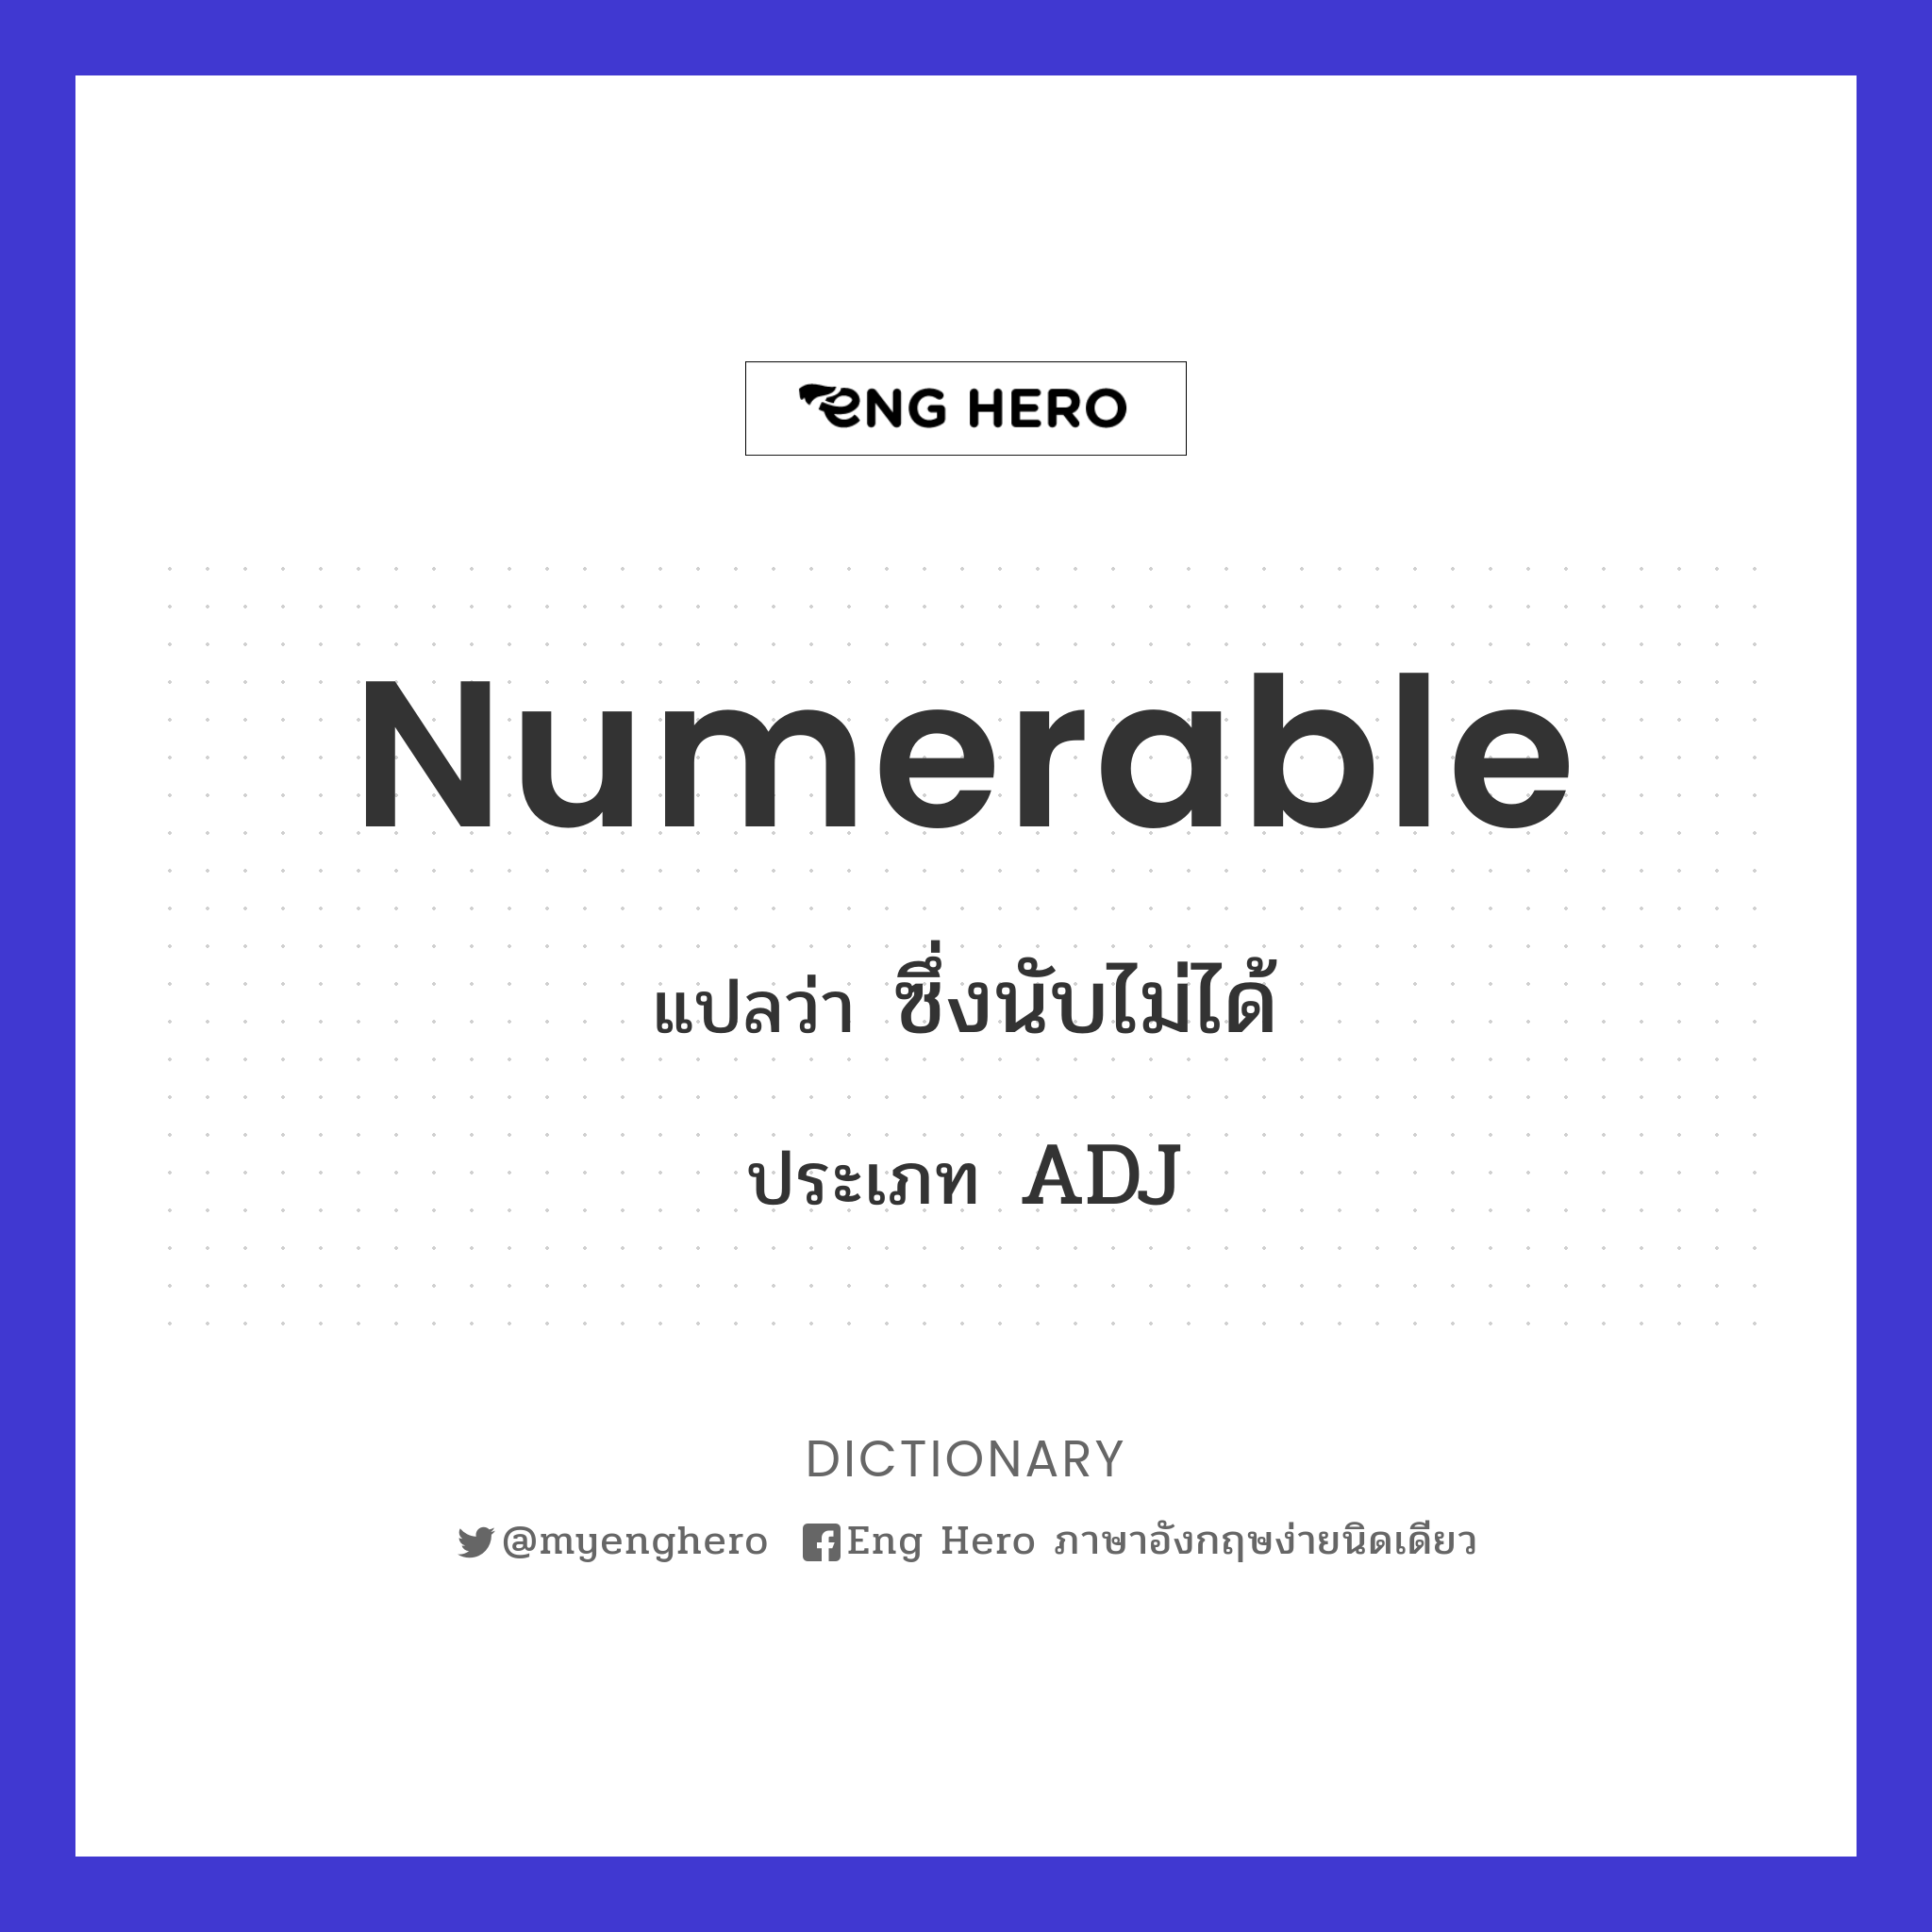 numerable